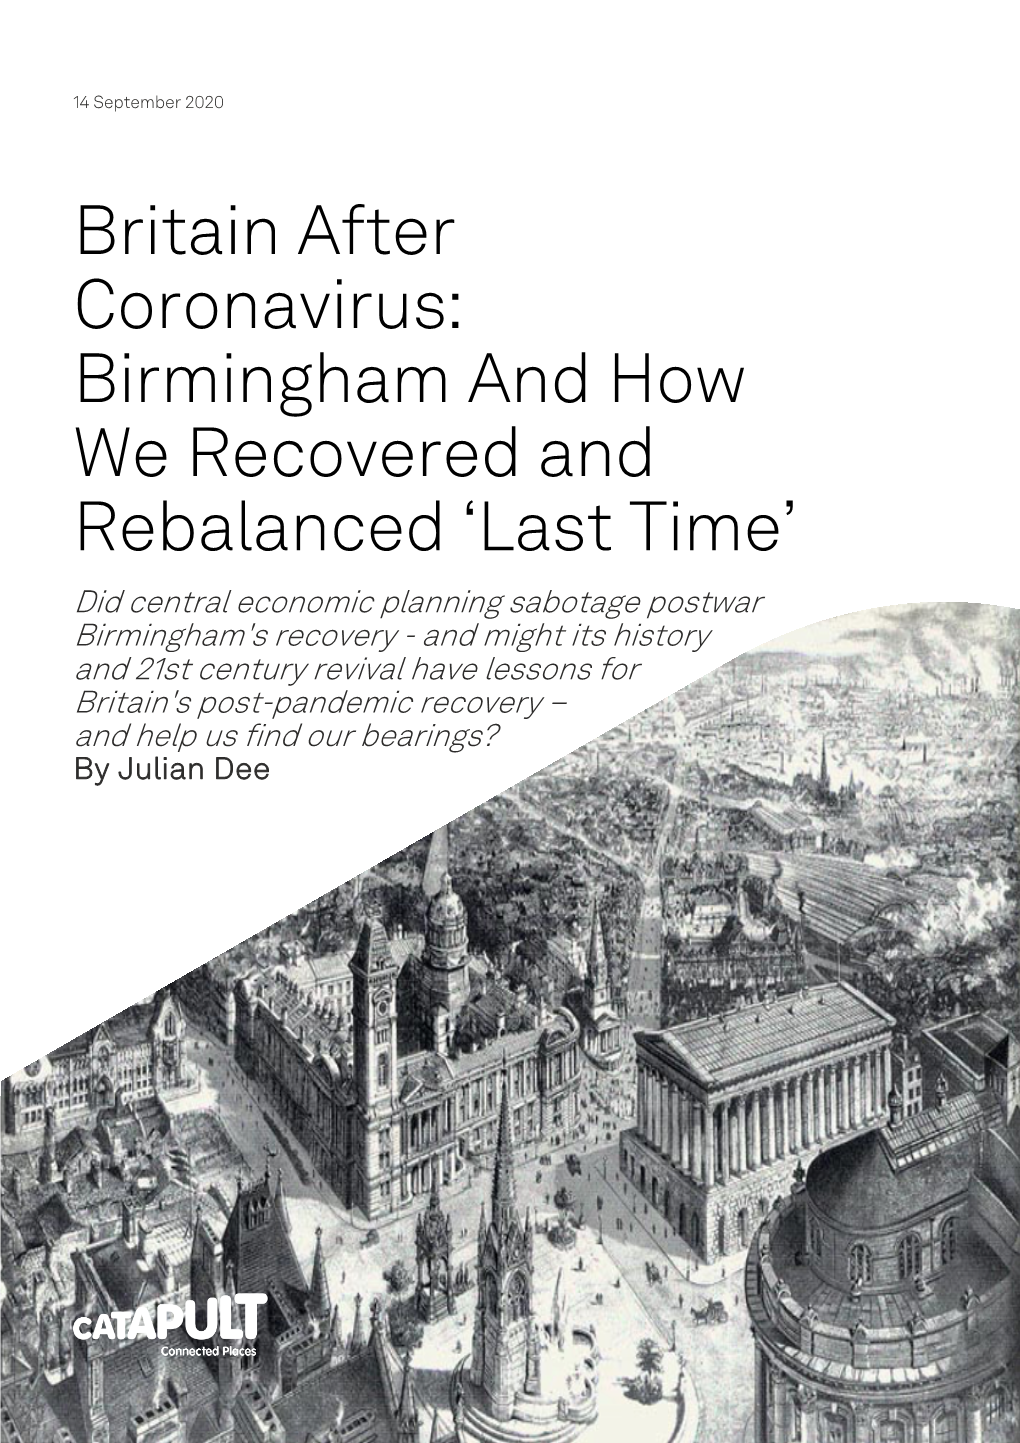 Britain After Coronavirus: Birmingham and How We Recovered And